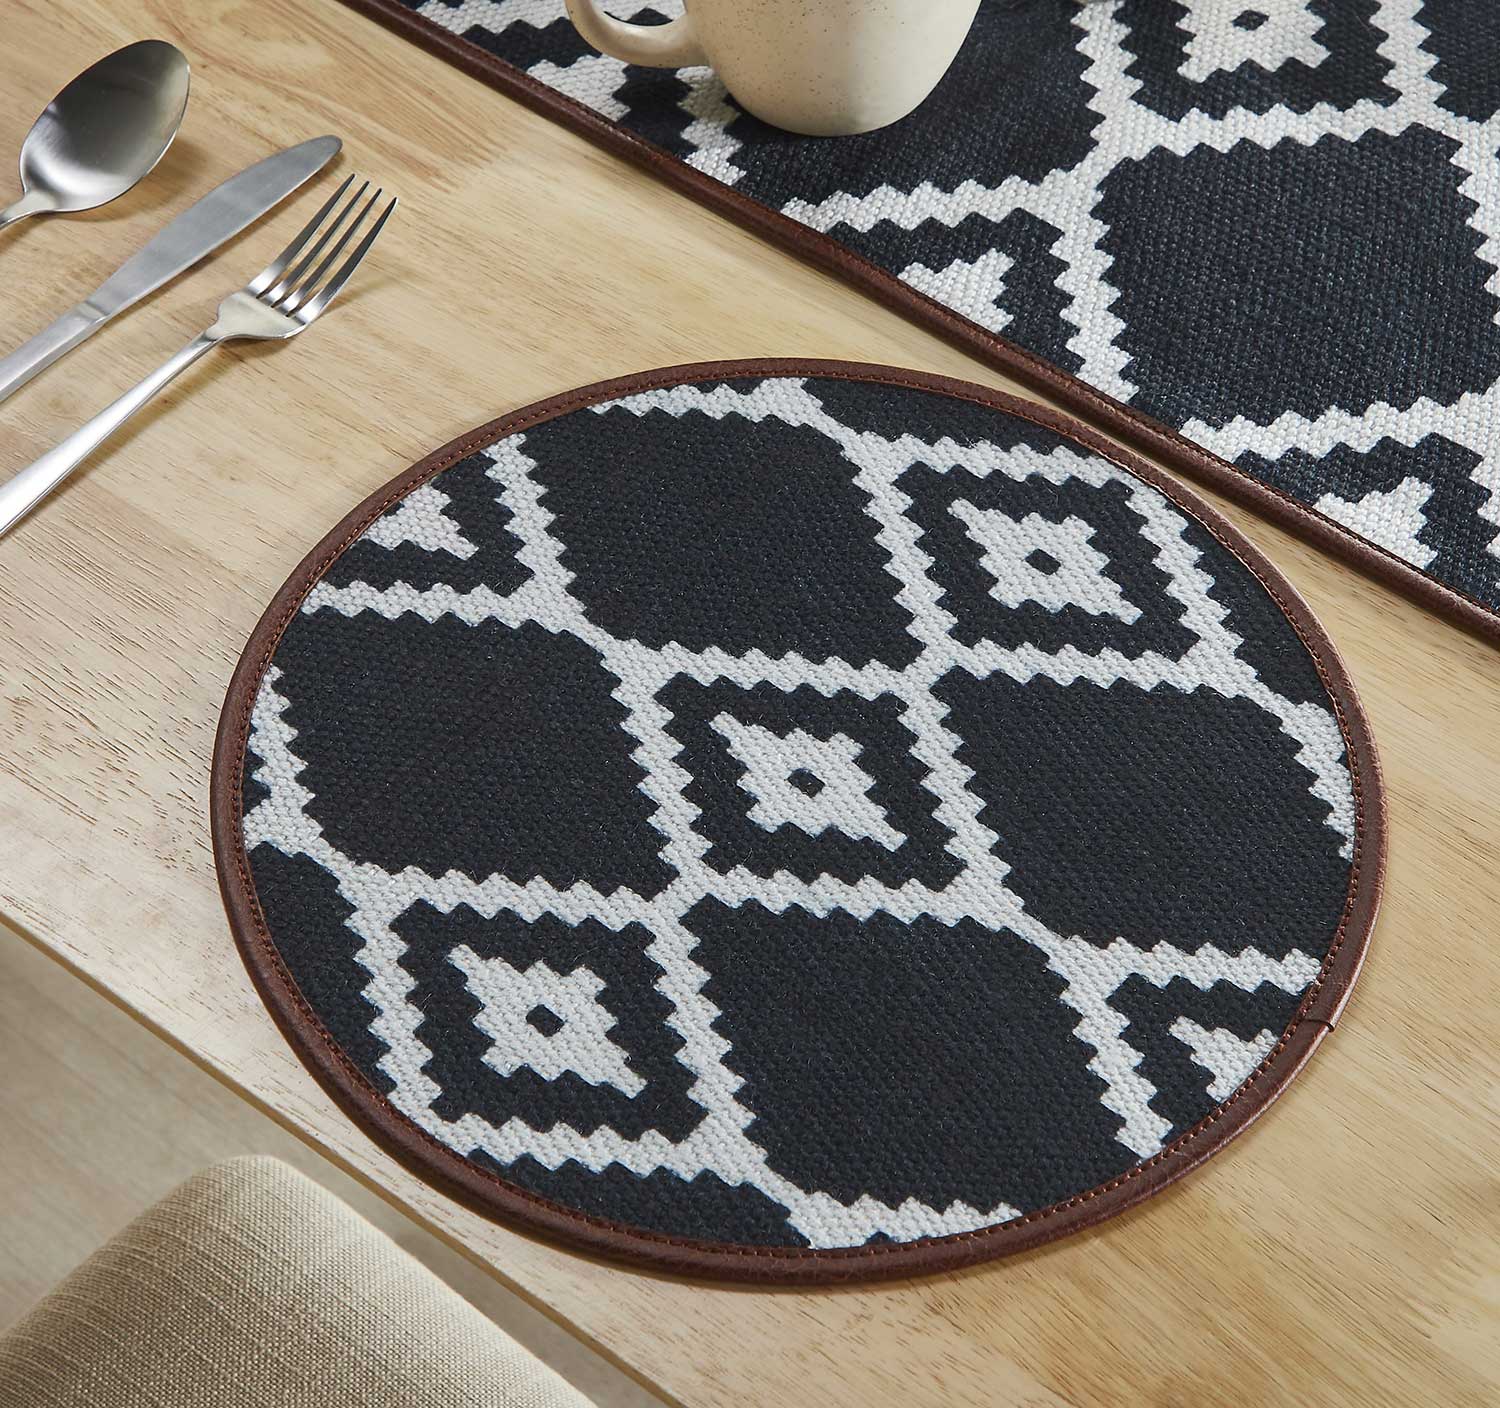 Mona-B Placemat Mona B Set of 2 Printed Placemats, 13 INCH Round, Best for Bed-Side Table/Center Table, Dining Table/Shelves - BR-305 (1319)